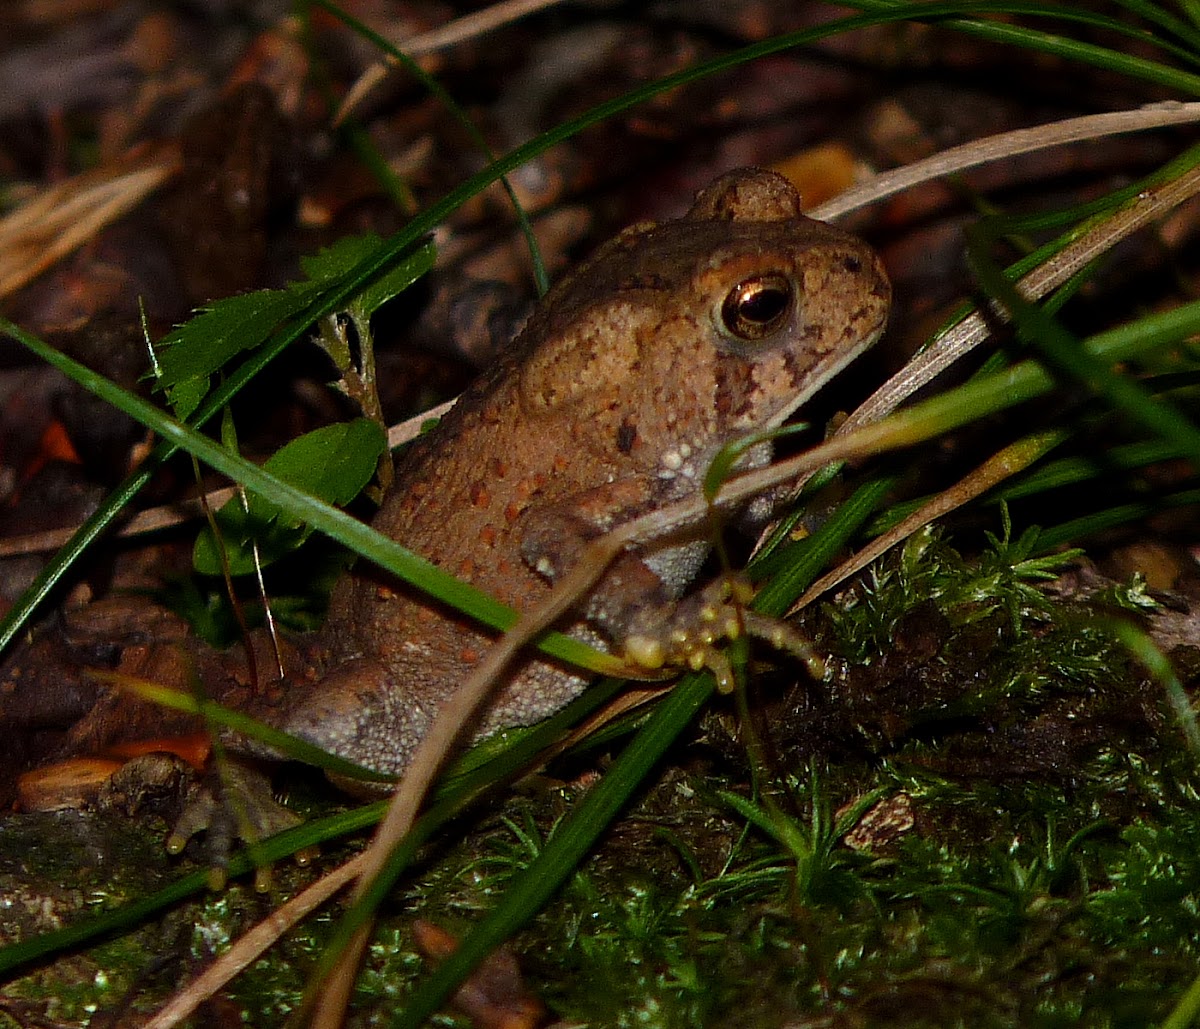 Young American toad